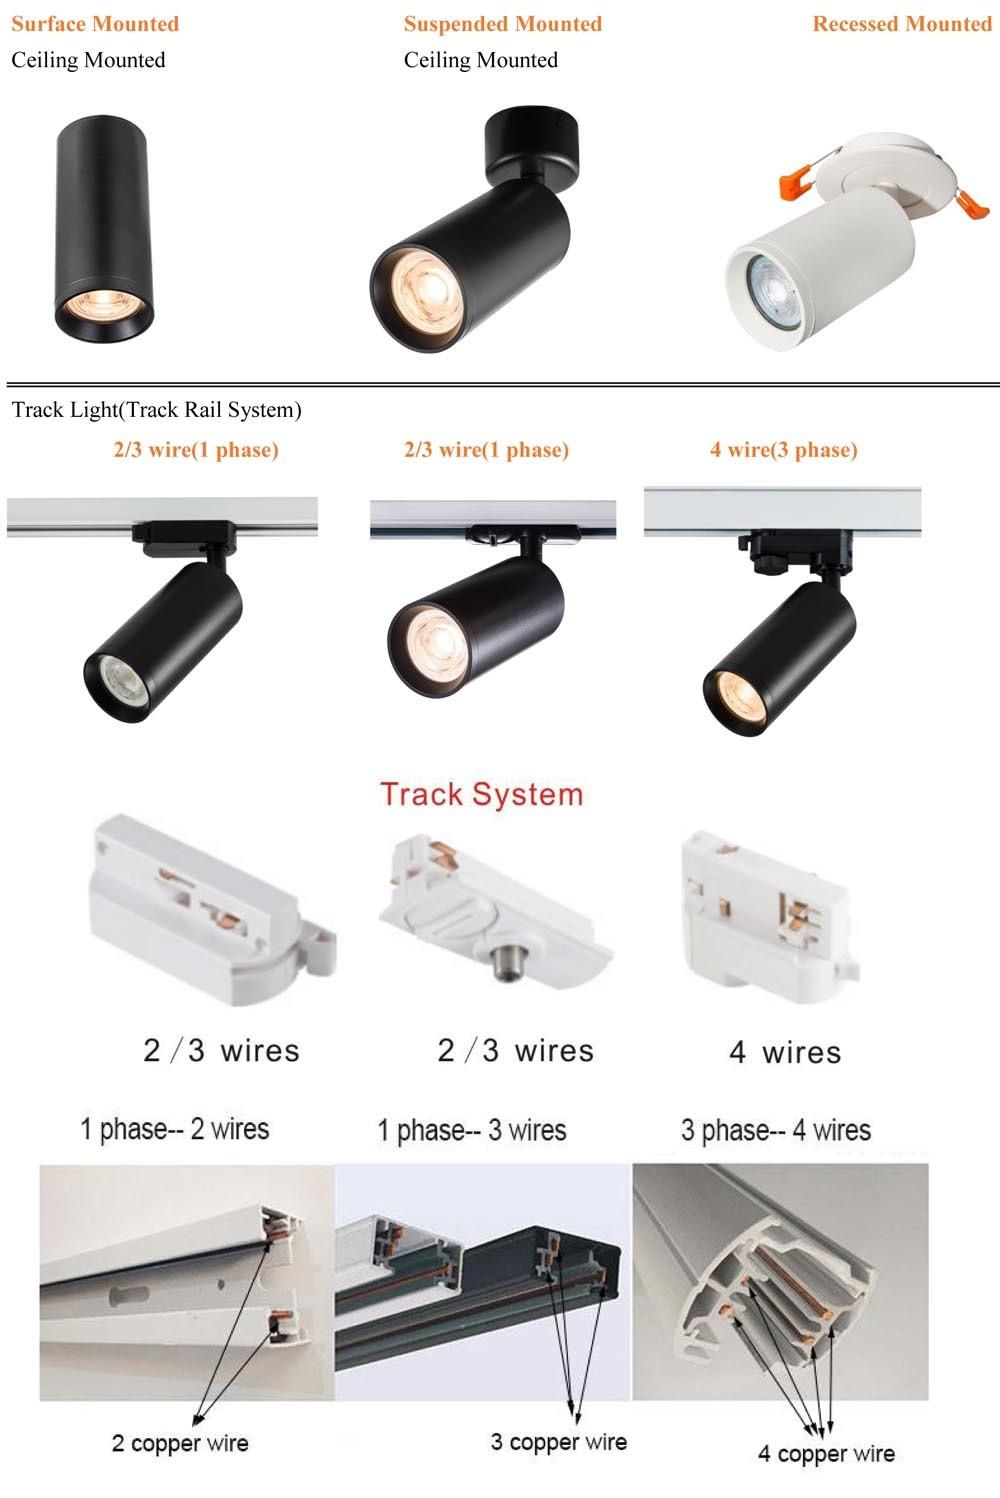 Angle Adjustable CREE COB LED Track Lights Commercial Residential Indoor Lighting 8W IP20 Modern Luxury Copper Track Spotlights